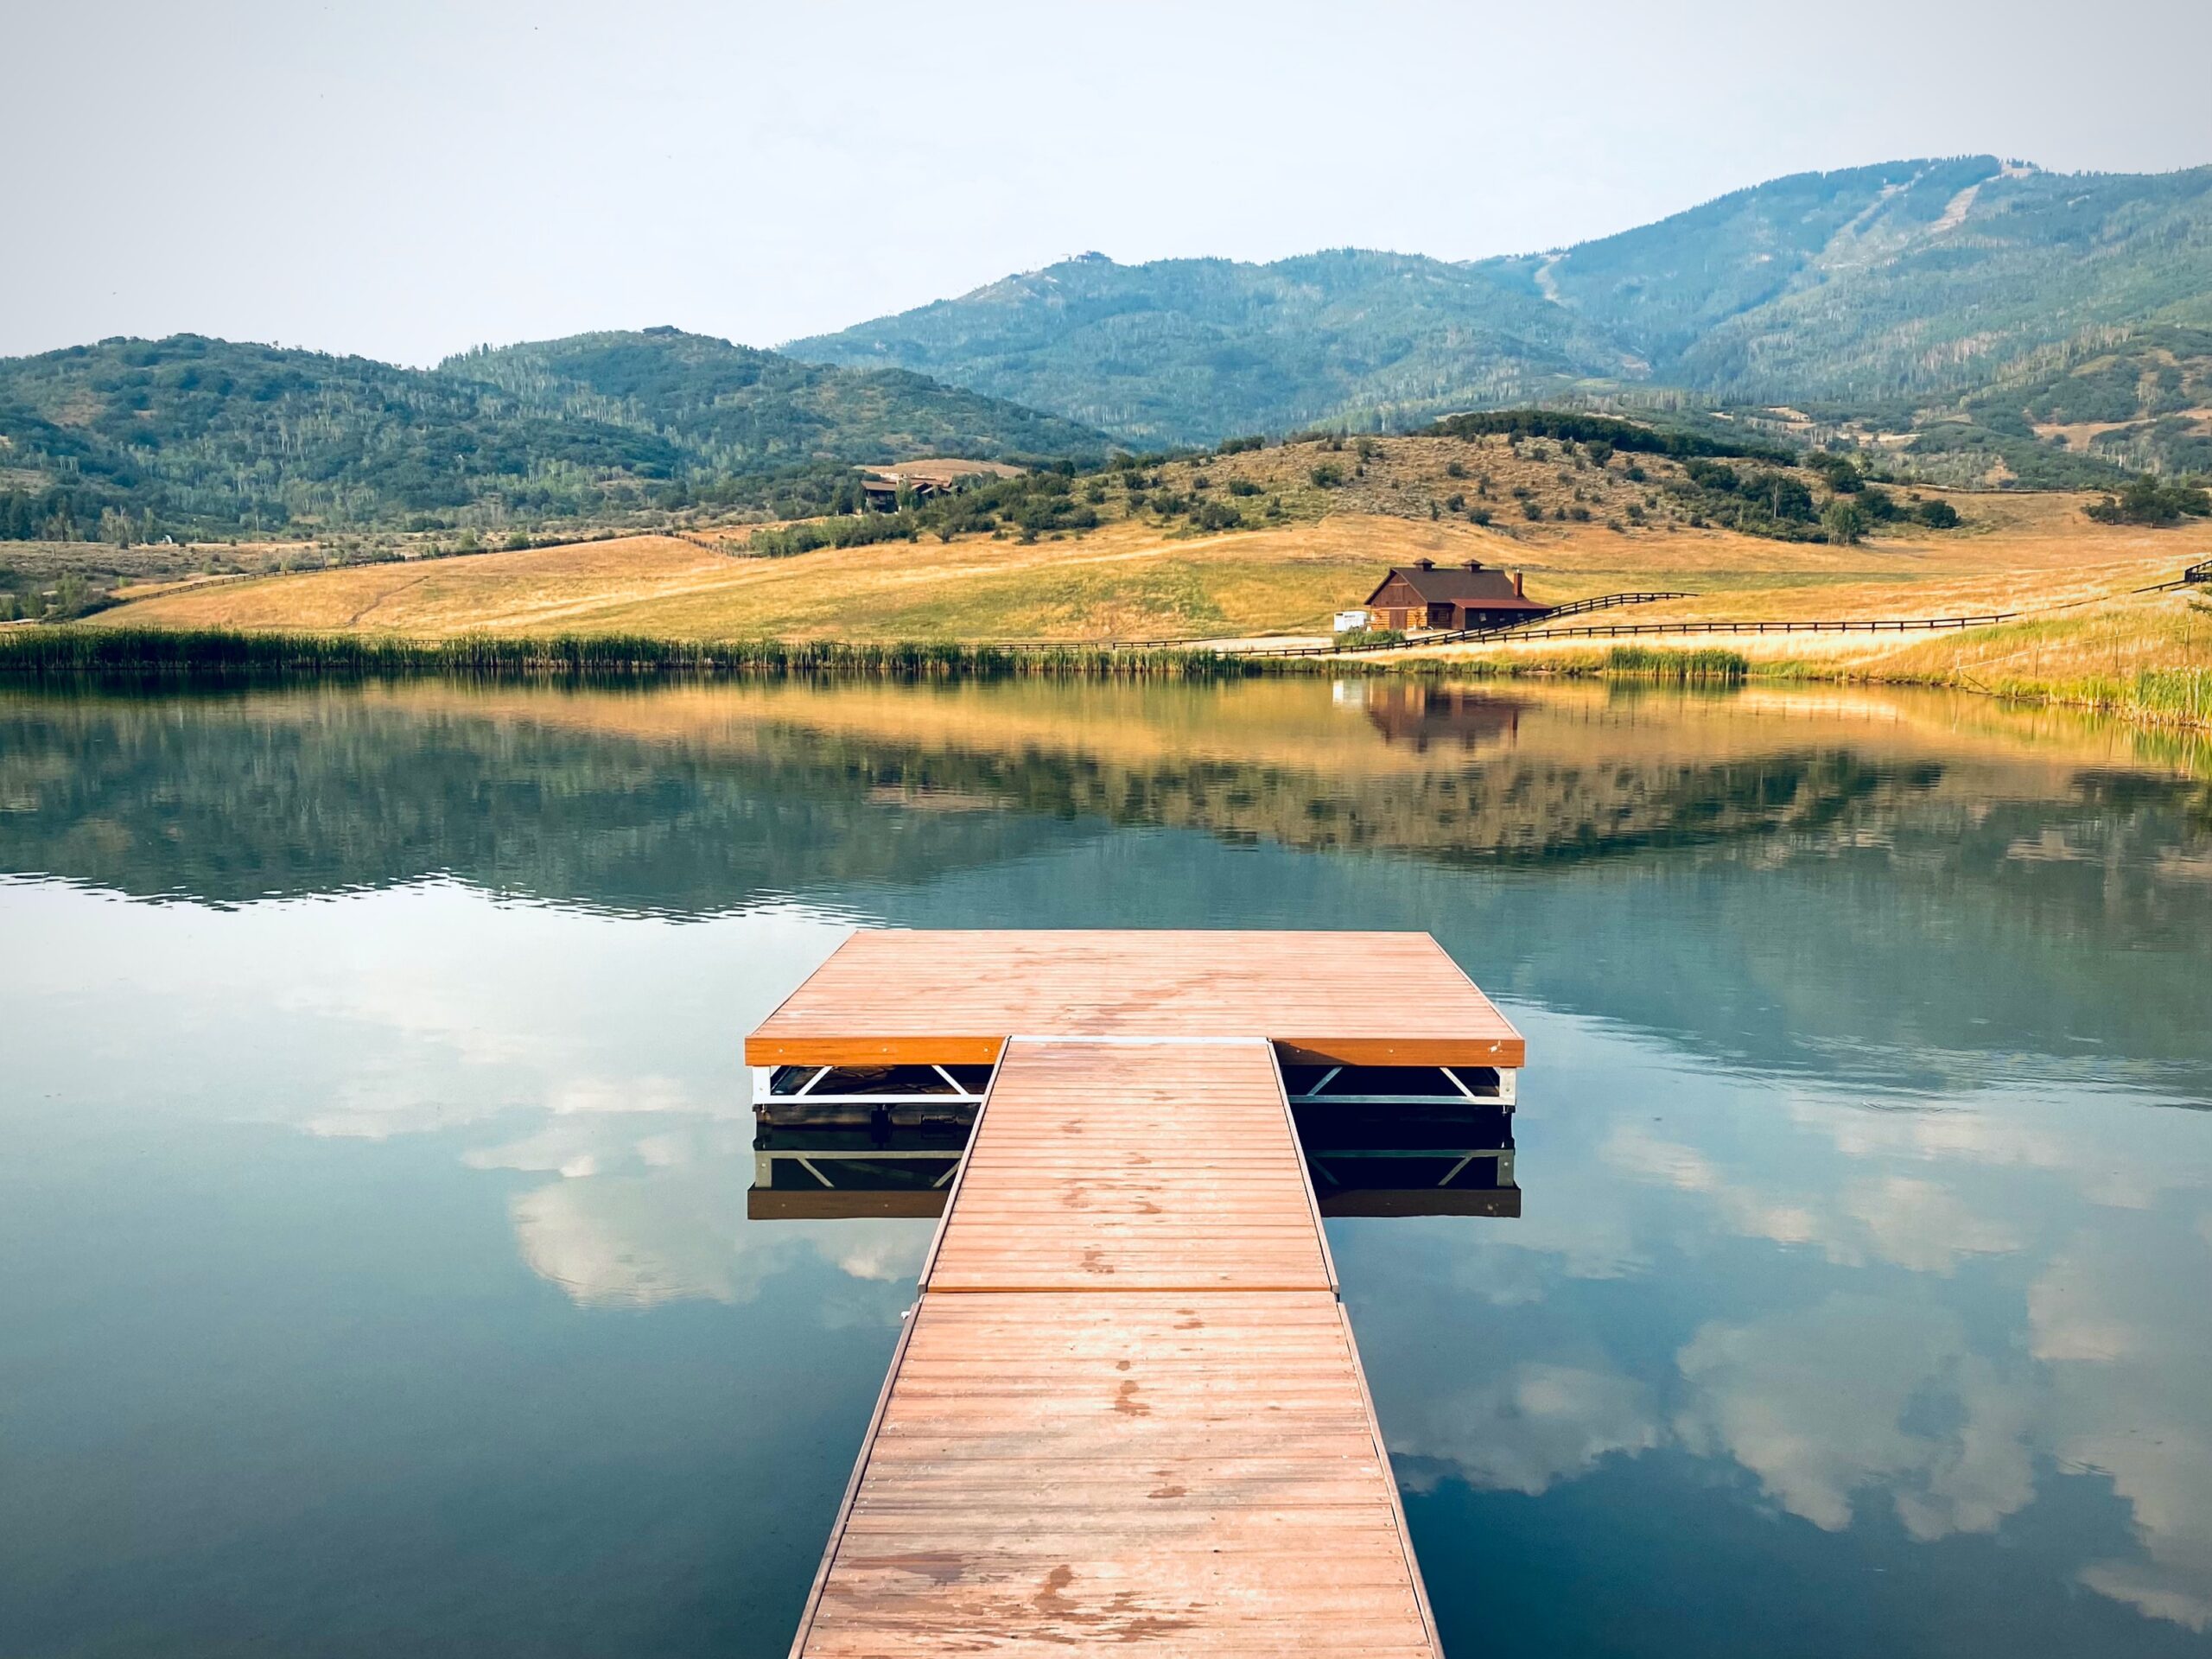 A wooden dock extends out onto a peaceful lake at Steamboat Springs